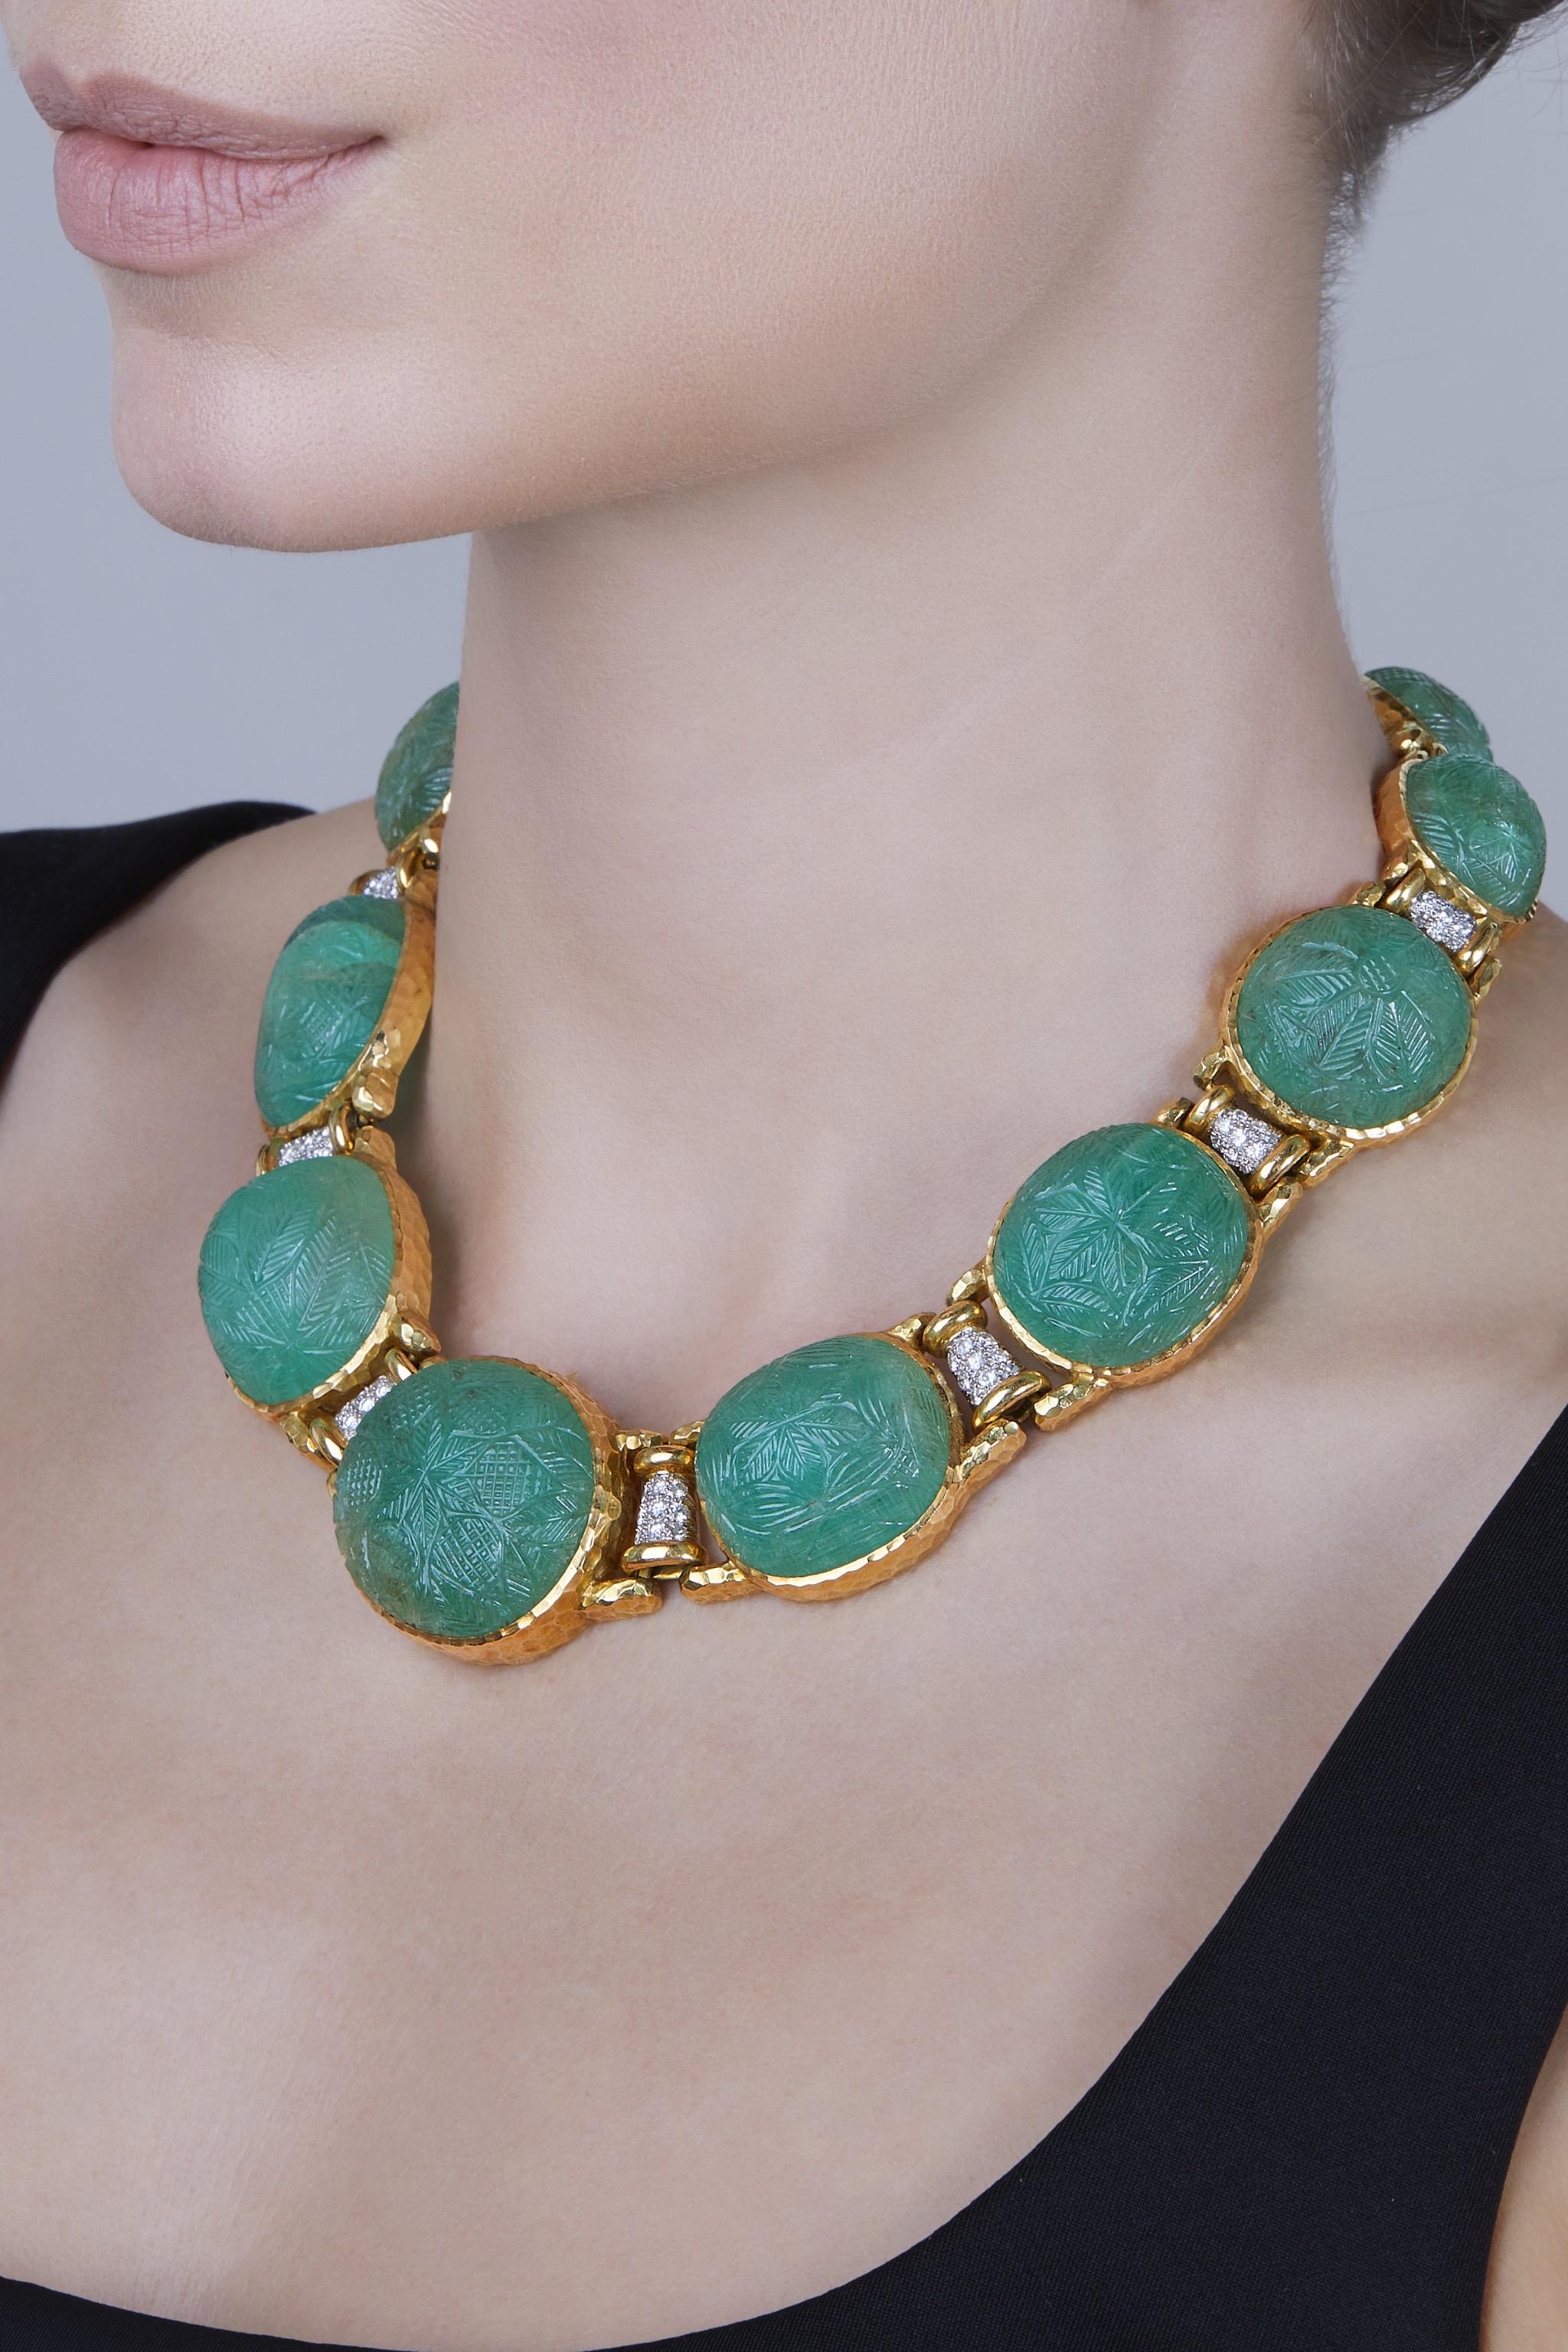 A stunning David Webb necklace composed of 12 carved emerald cabochons bezel-set within hammered gold links, accented by round diamonds. Inner circumference measures 14.5 inches. Made in the USA, circa 1970.